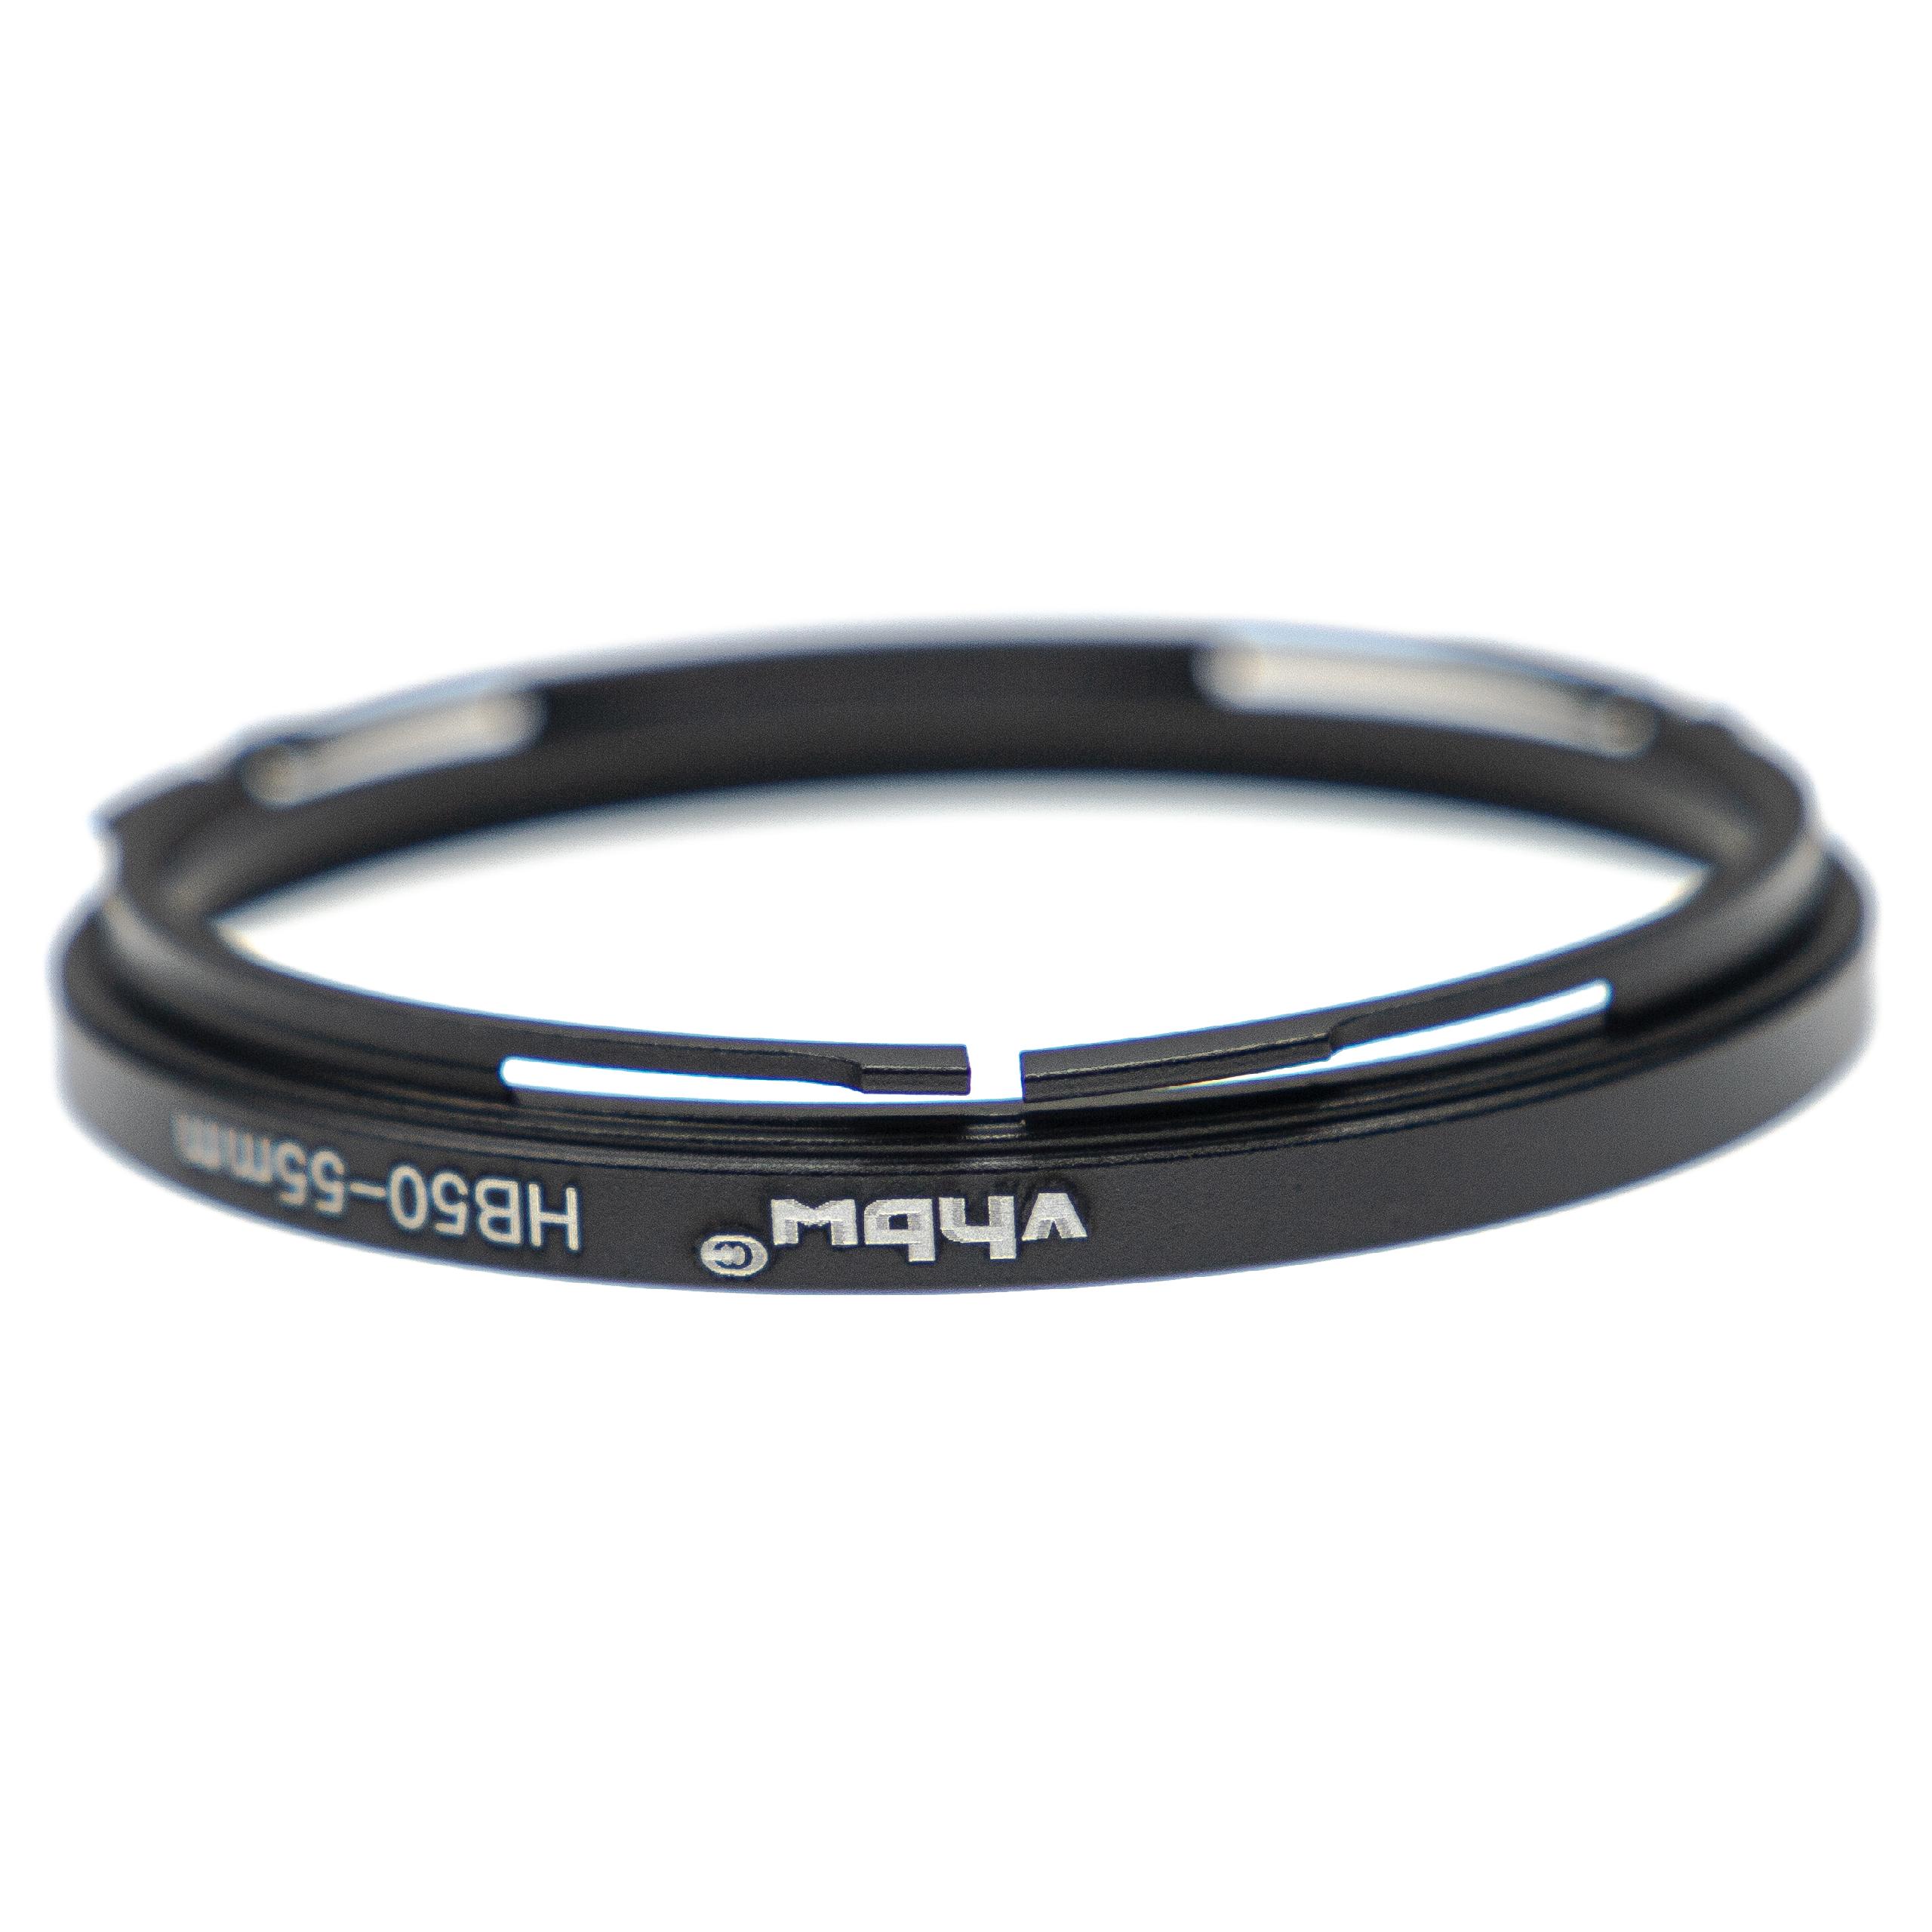 55 mm Filter Adapter suitable for Hasselblad B50 bayonet Camera Lens